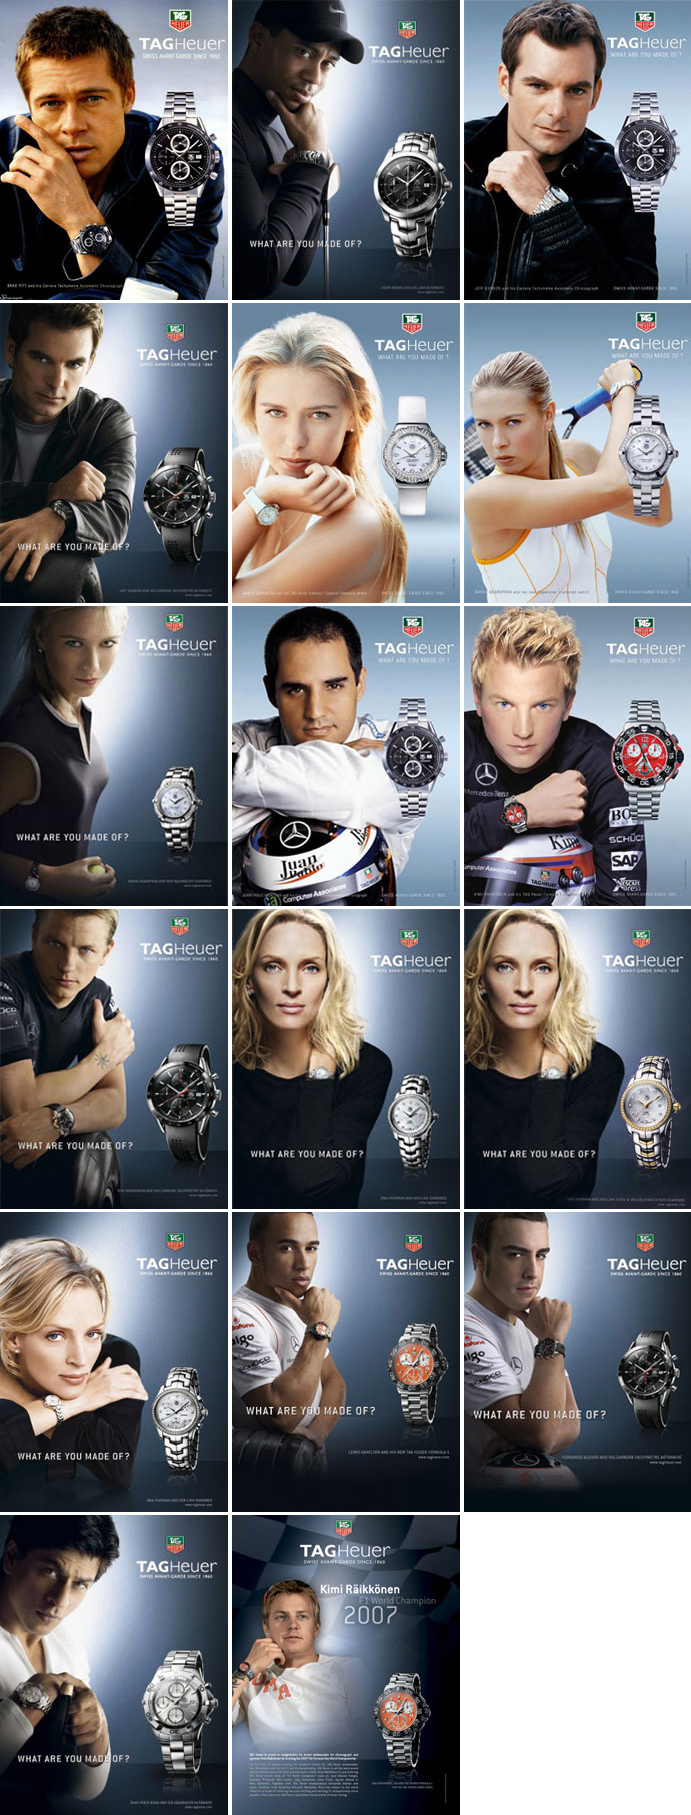 Tag Heuer Advertisements